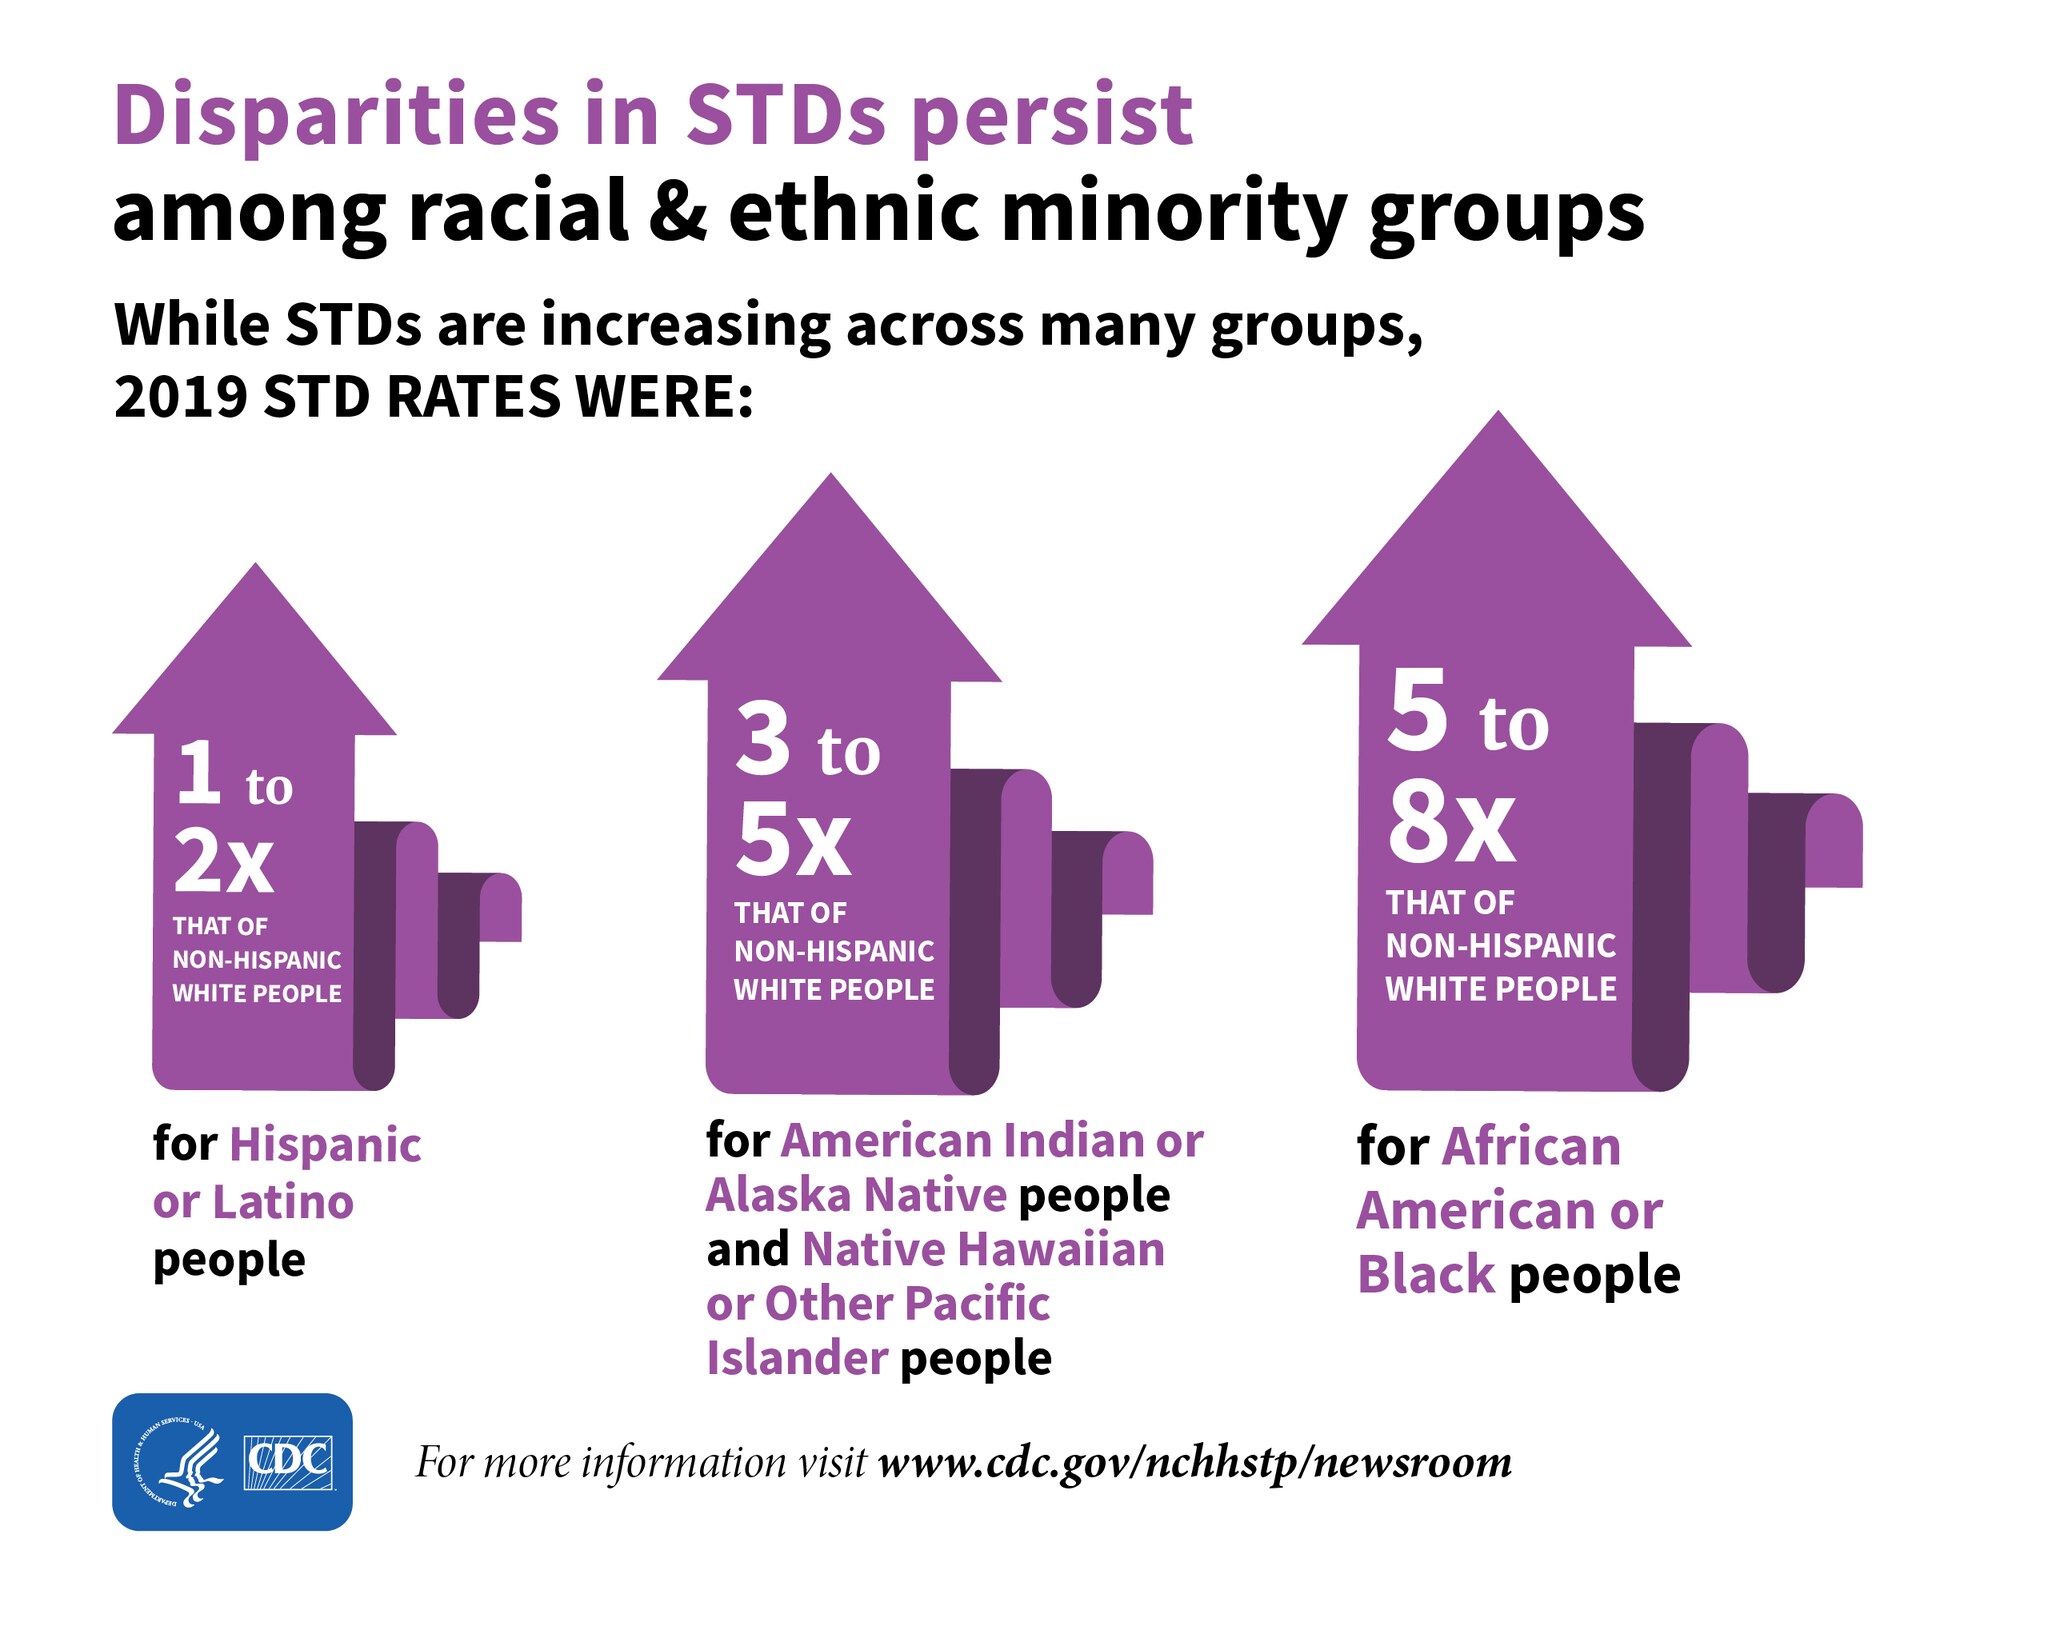 The graphic shows that while STDs are increasing across many groups, in 2019 disparities in STDs persisted among some racial and ethnic minority groups.  In 2019 STD rates for Hispanic or Latino people were 1-2 times that of non-Hispanic White people. In 2019 STD rates for American Indian or Alaska Native and Native Hawaiian or Other Pacific Islander people were 3-5 times that of non-Hispanic White people  In 2019 STD rates for African American or Black people were 5-8 times that of non-Hispanic White people